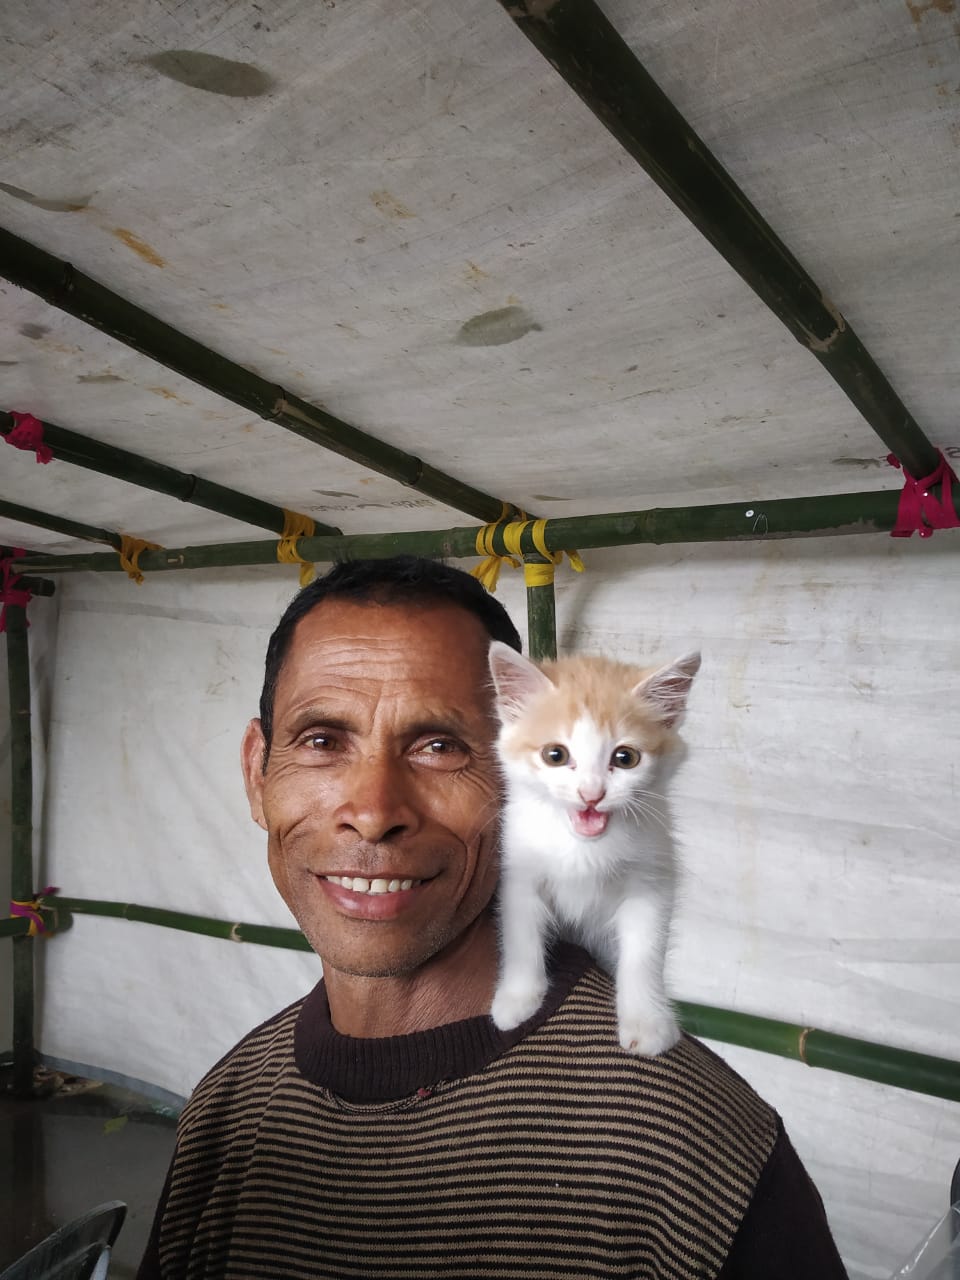 At Village camp , the kitten was brought for her health check up